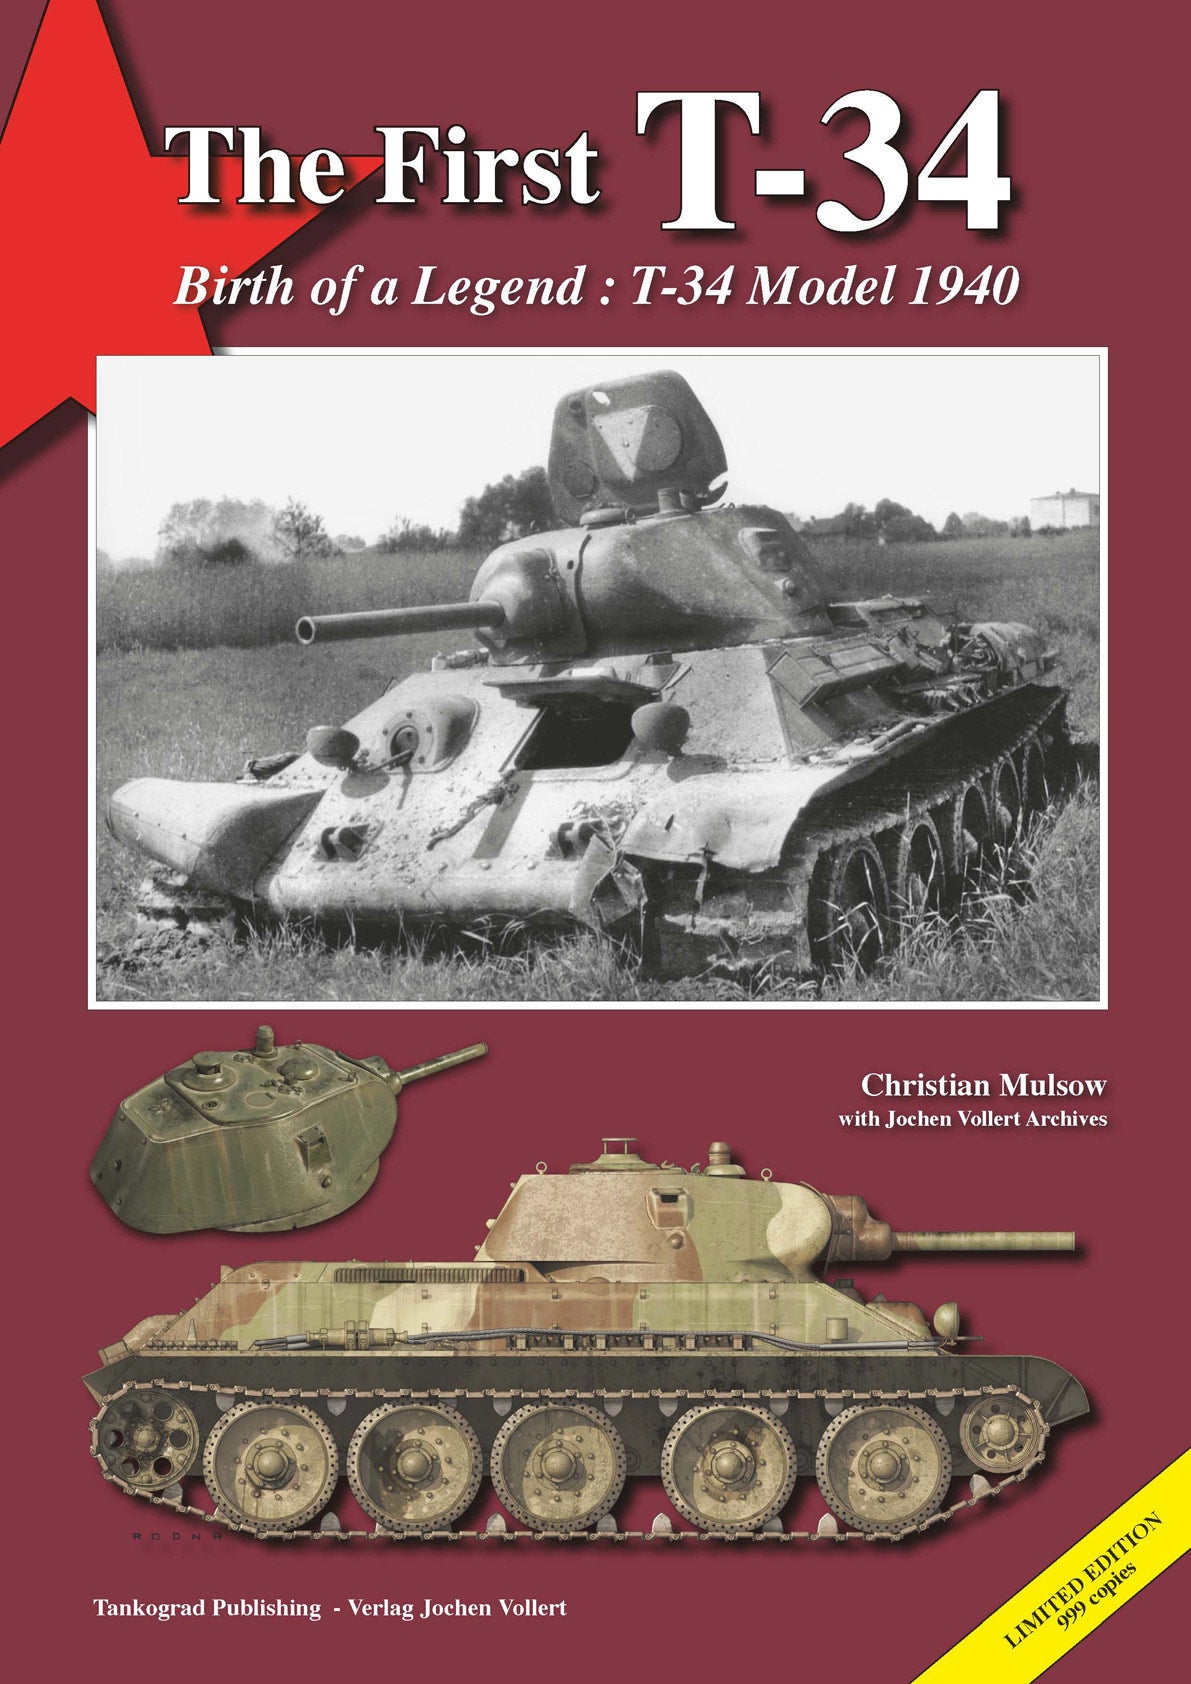 The First T-34 Birth of a Legend : The T-34 Model 1940